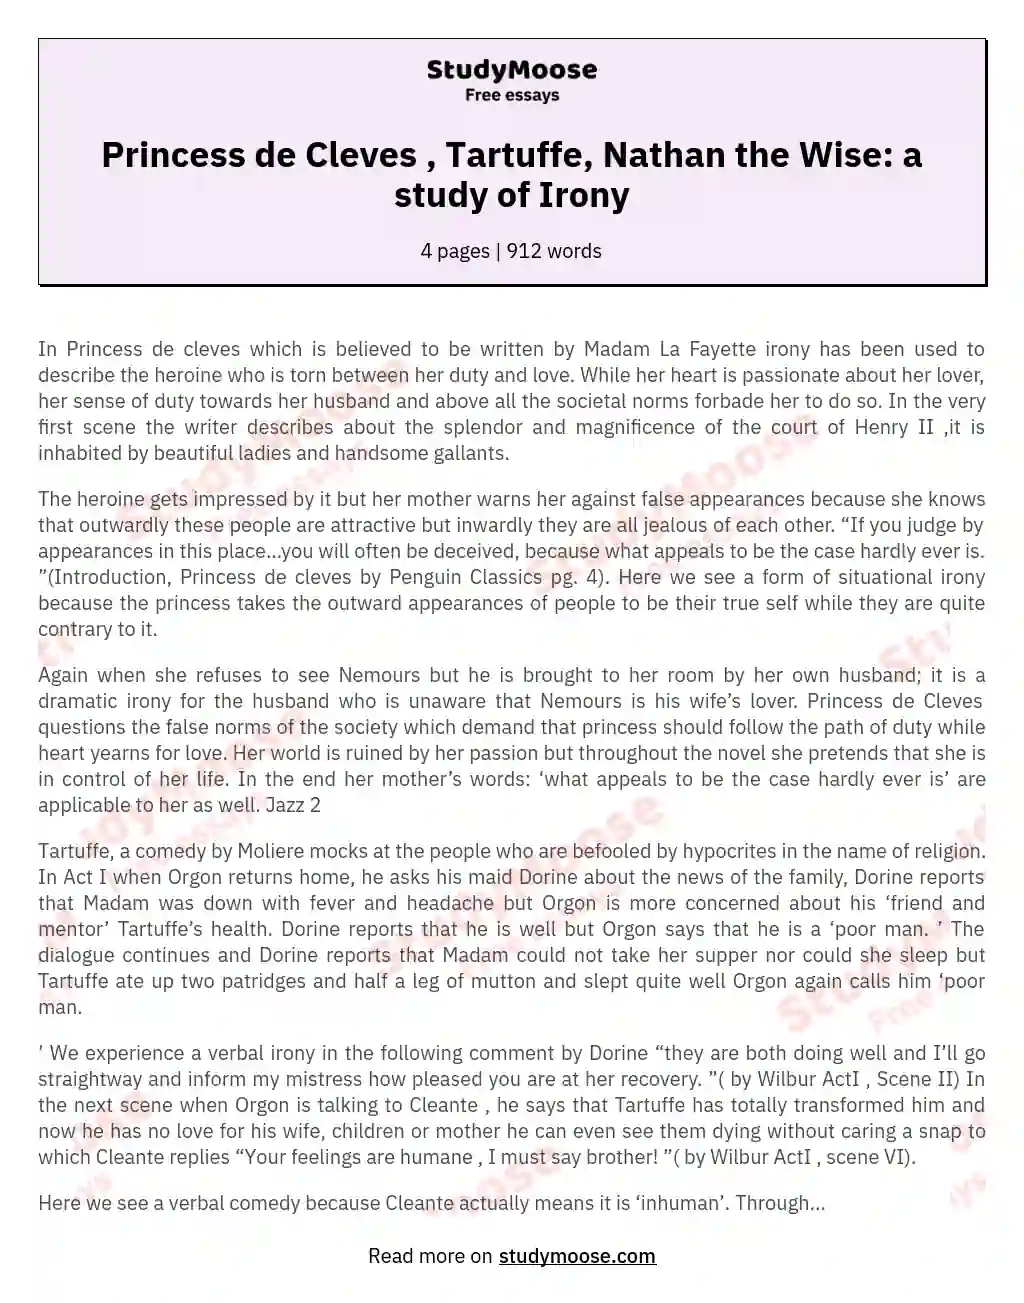 Princess de Cleves , Tartuffe, Nathan the Wise: a study of Irony essay